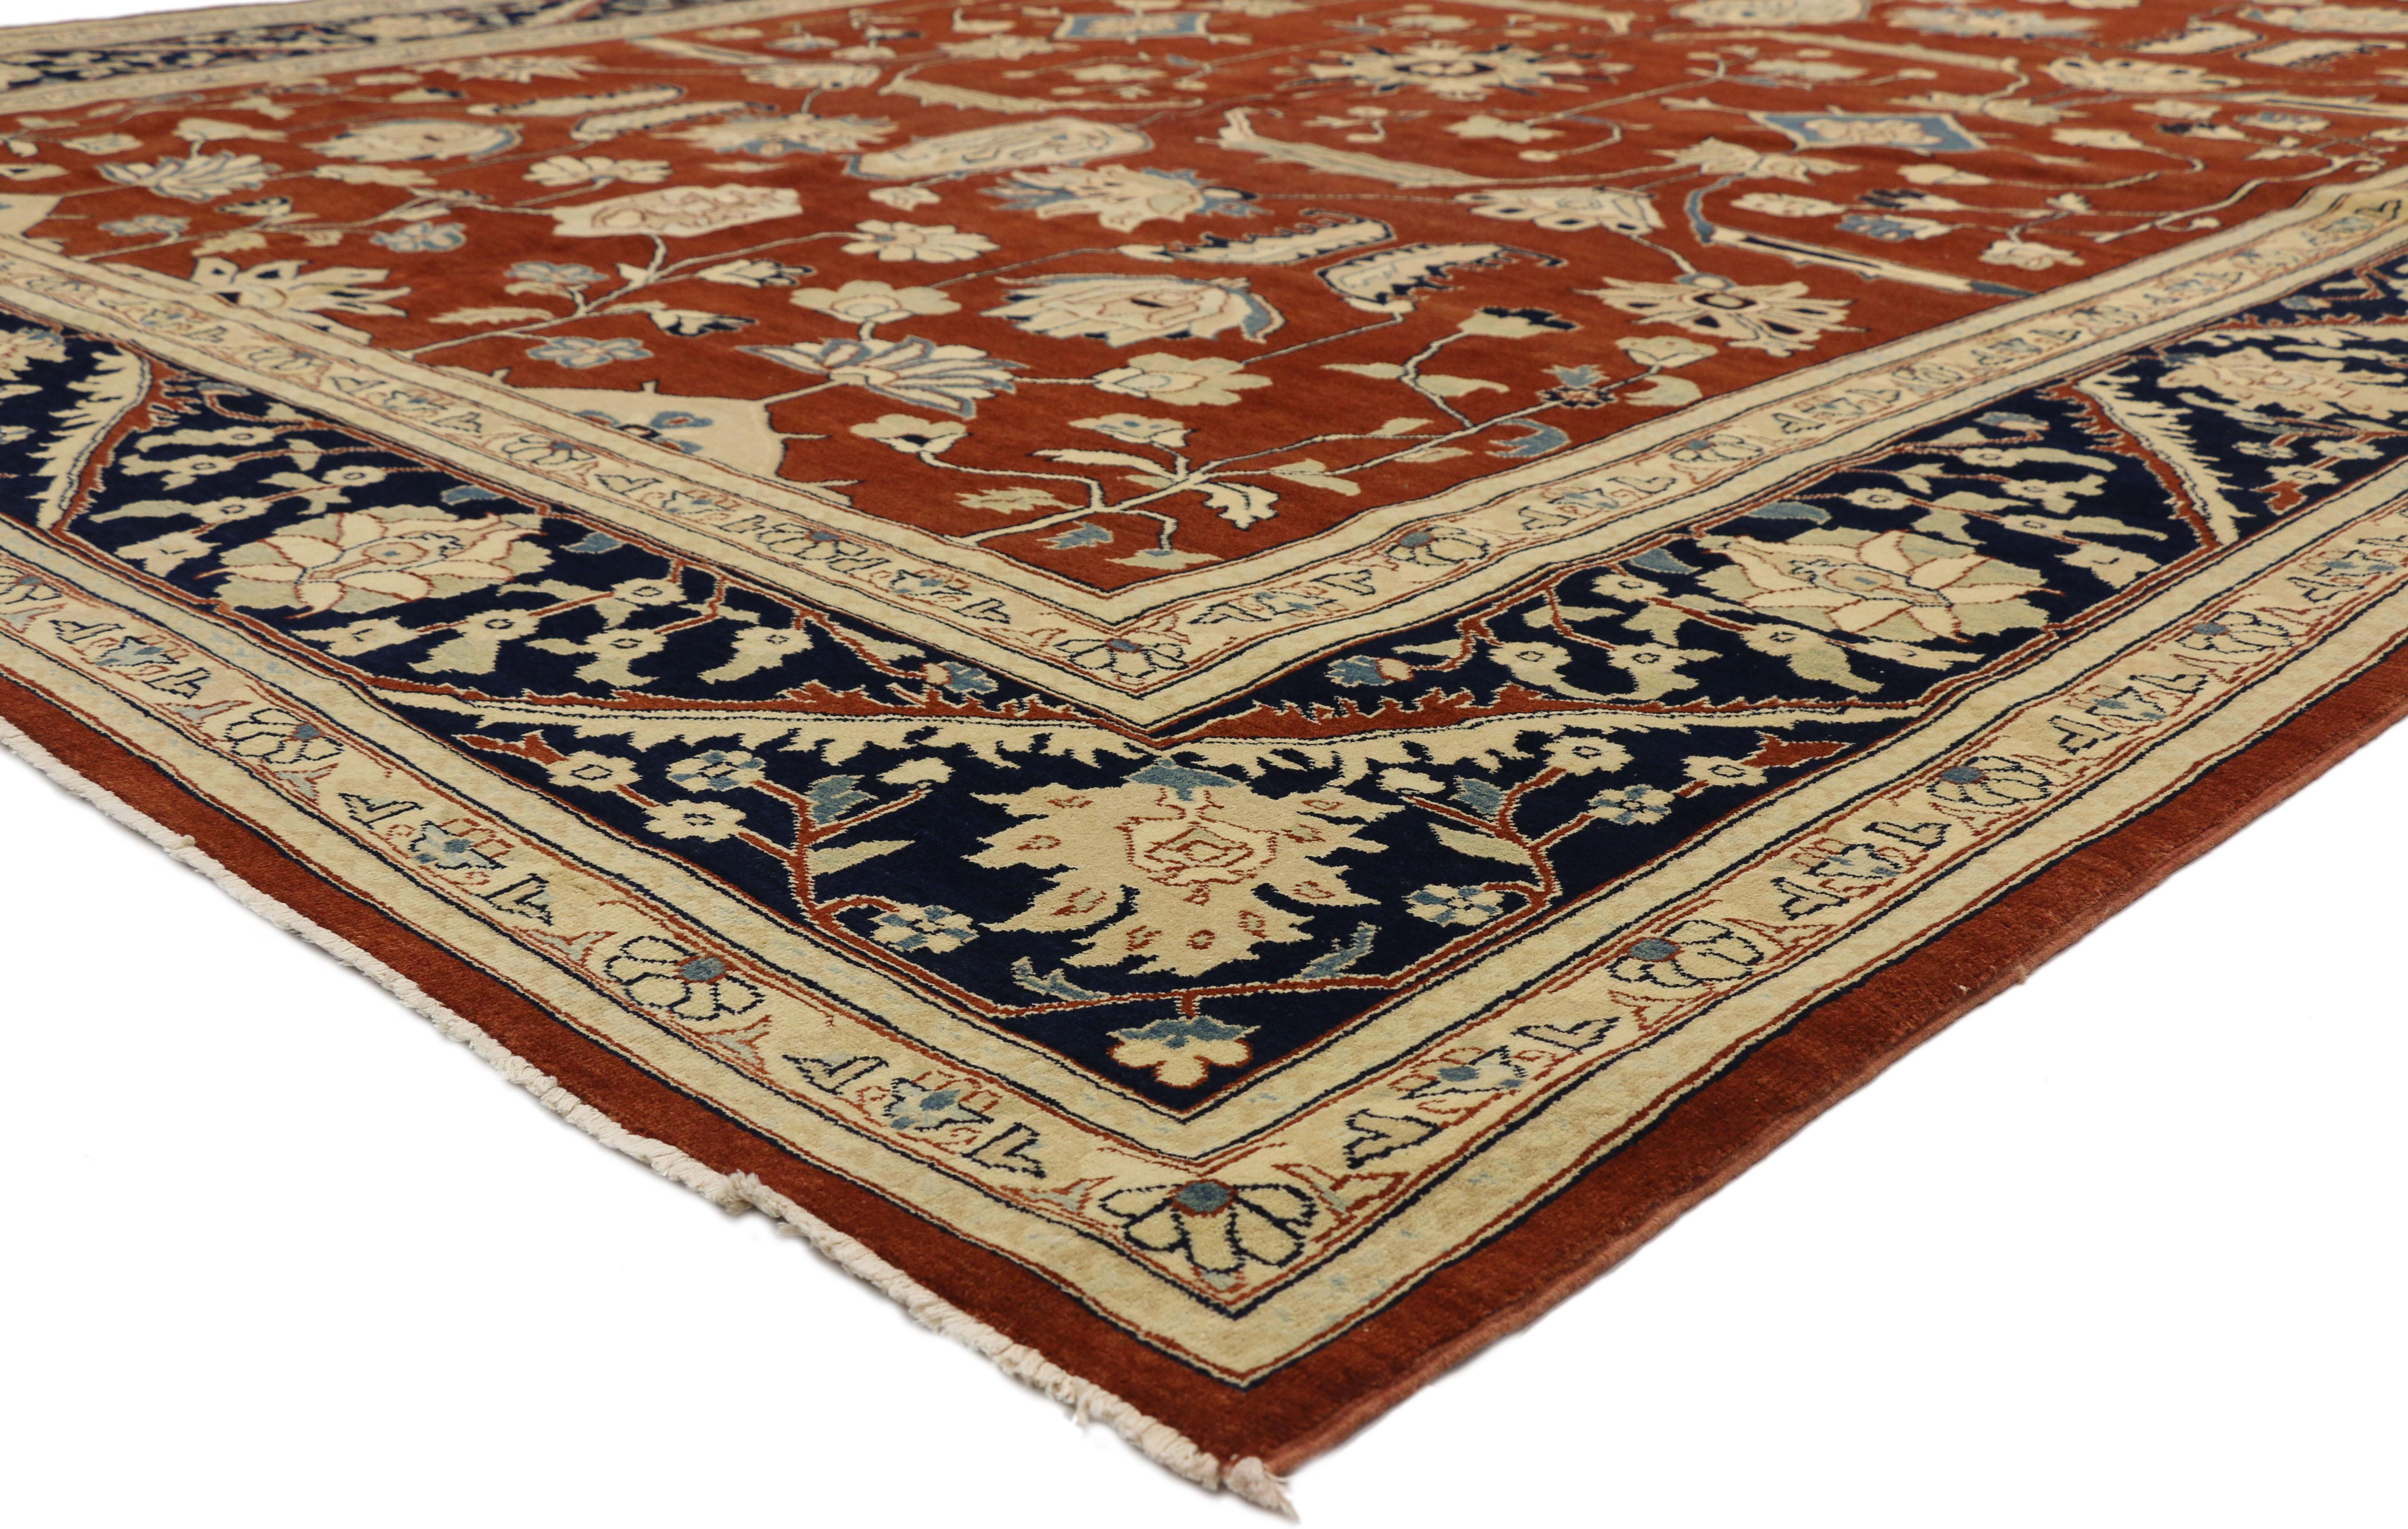 74583 vintage Persian Design Traditional Pakistani rug with Federal style. This hand knotted wool vintage Persian style area rug features an all-over lively botanical pattern composed of blooming palmettes, stylized lotus, diamond lozenges, leafy